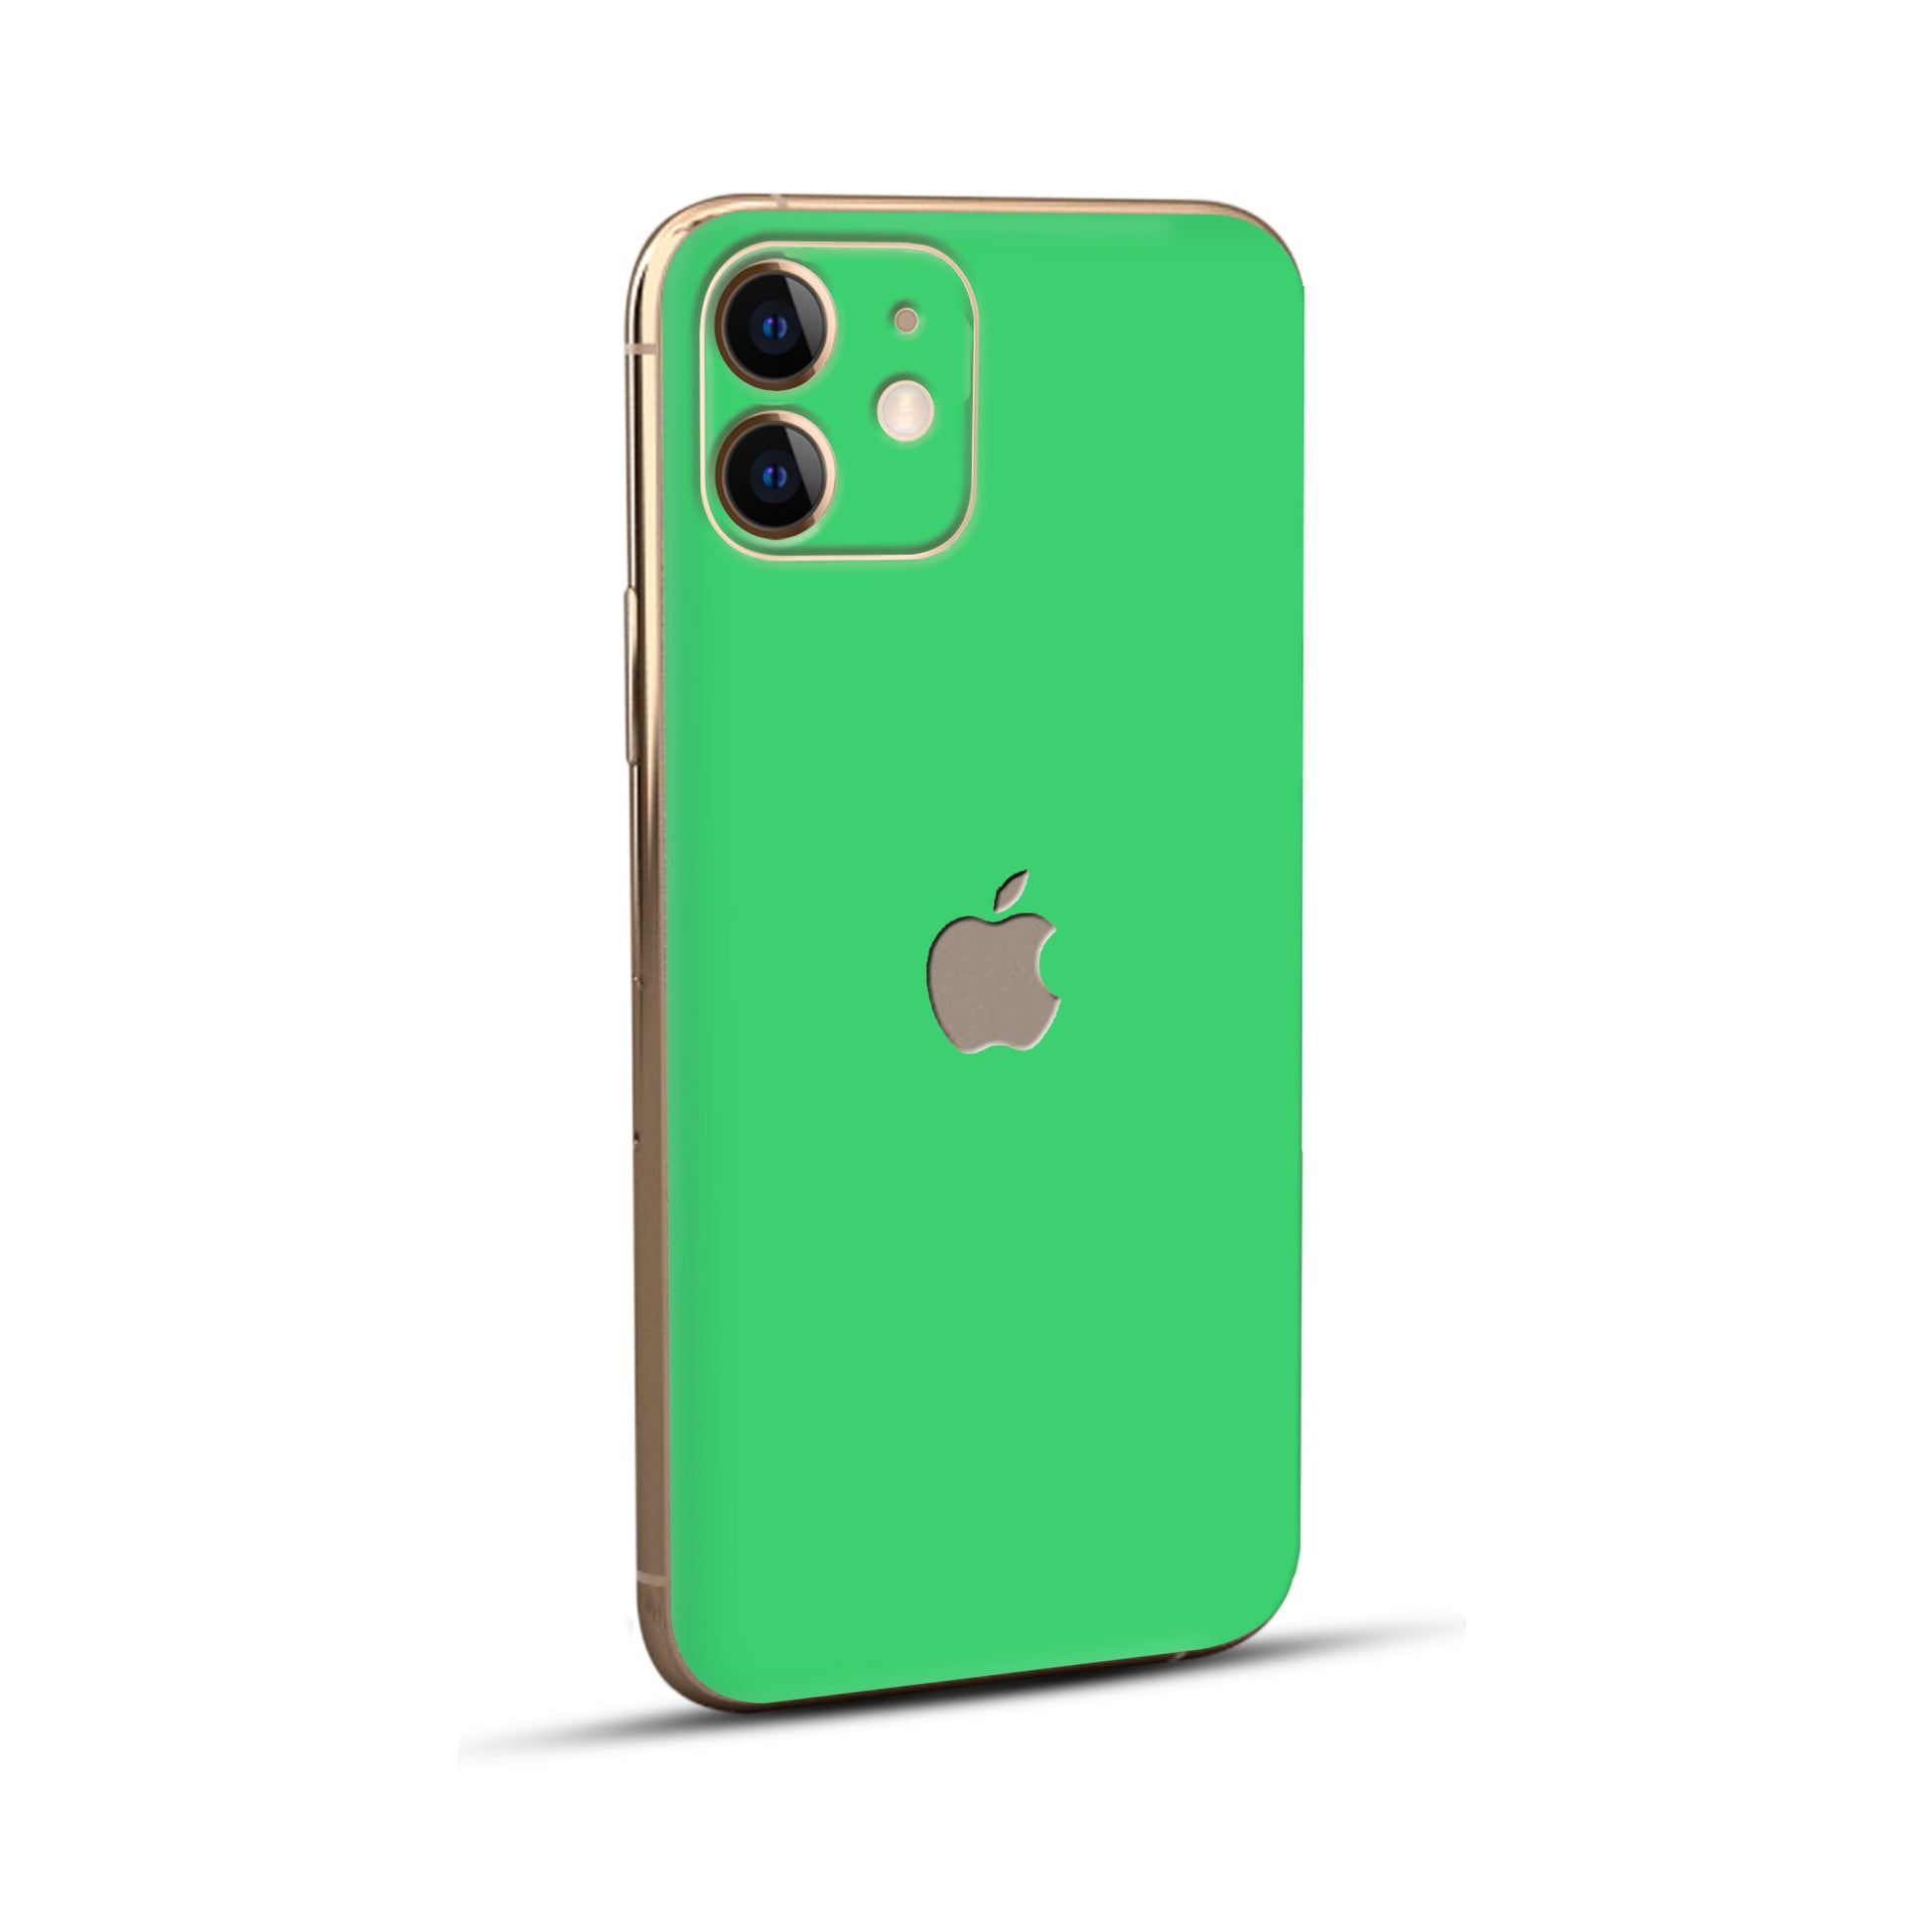 Normout Skin Green | Apple iPhone 11 | Normout.com